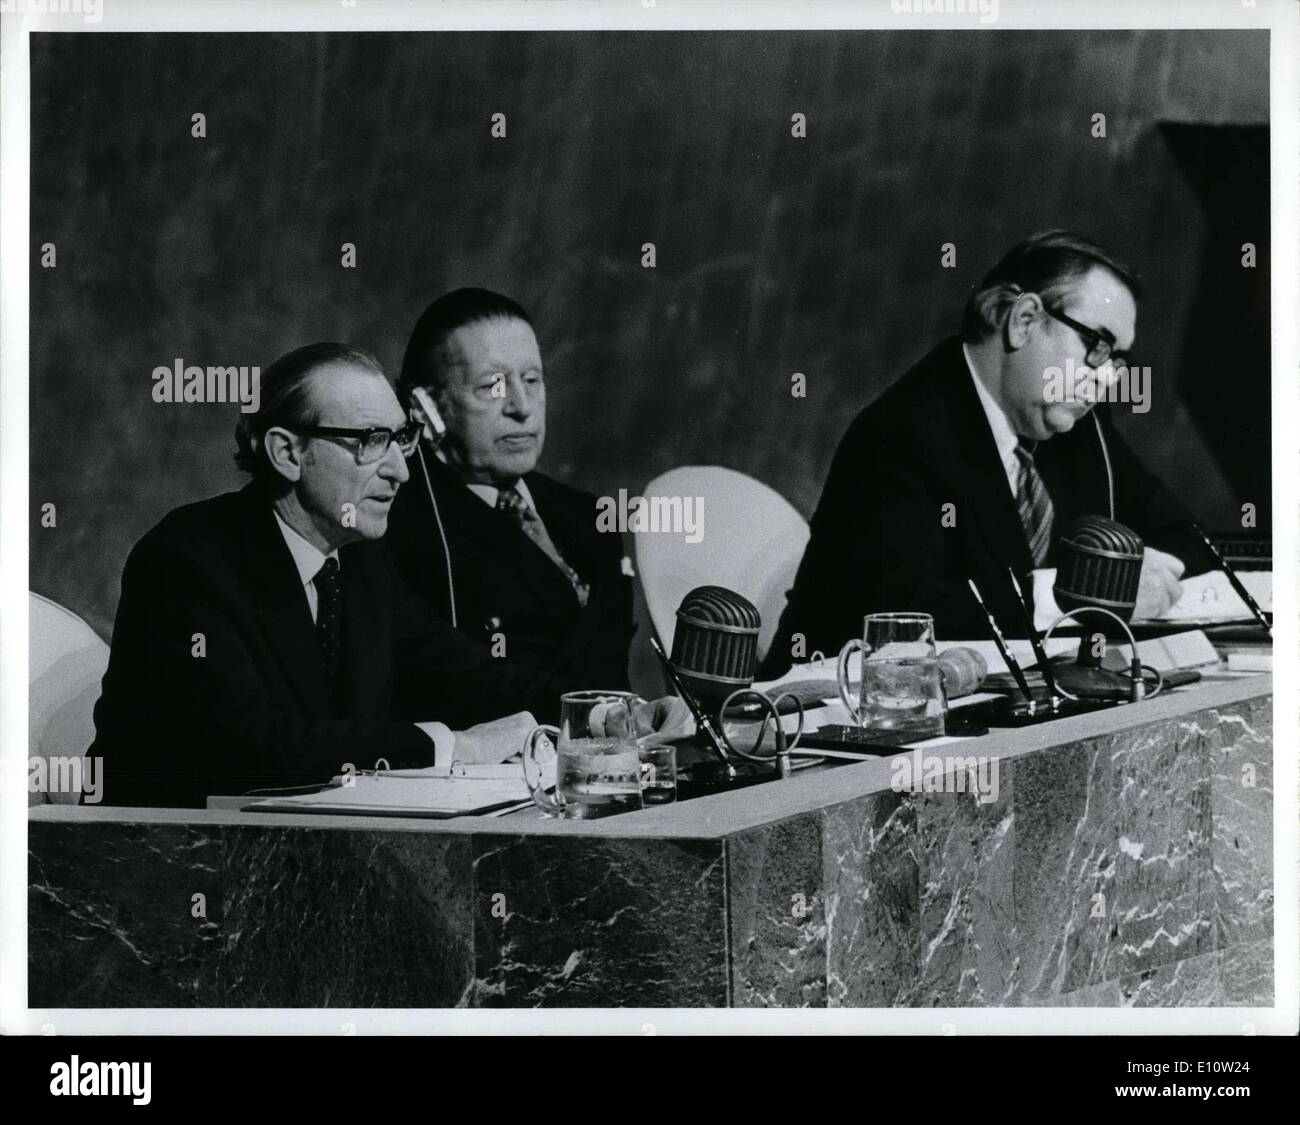 Apr. 04, 1974 - General Assembly begins special session of Raw Materials and development: The General Assembly this afternoon opened its sixth special session, which was called, at the request of Algeria, to study the problems of raw materials and development. Leopoldo Benites ( Exuador), President of the twenty eight regular session of the Assembly, was elected by acclamation as President of the special session, and an Ad Hoe Committee was established. Secretary General Kurt Waldheim addressing the Assembly Stock Photo